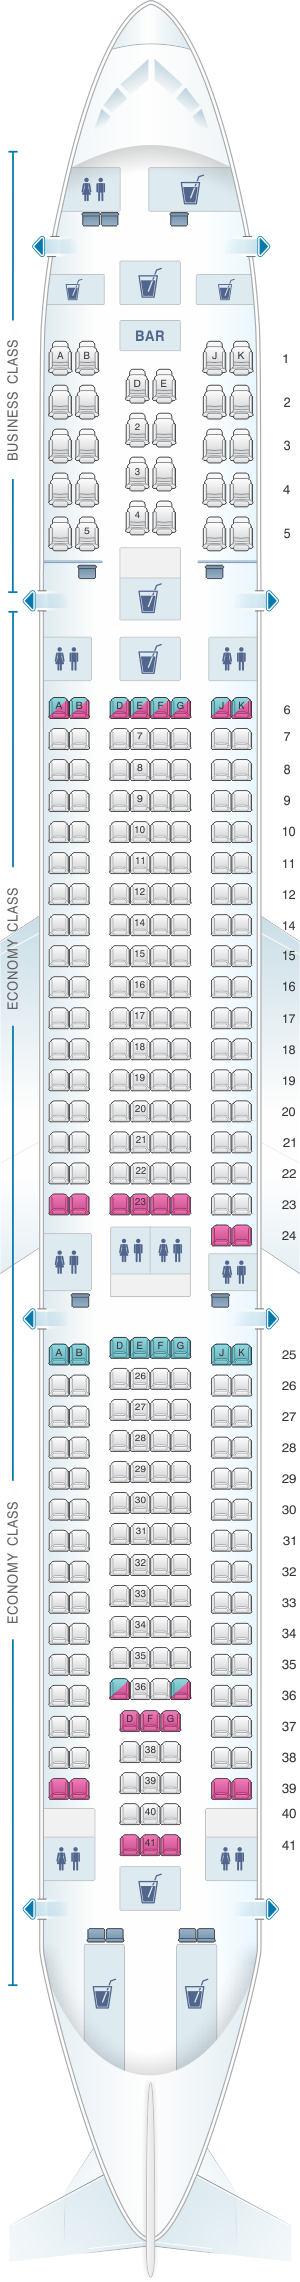 Seat Map Turkish Airlines Airbus A330 300 | SeatMaestro